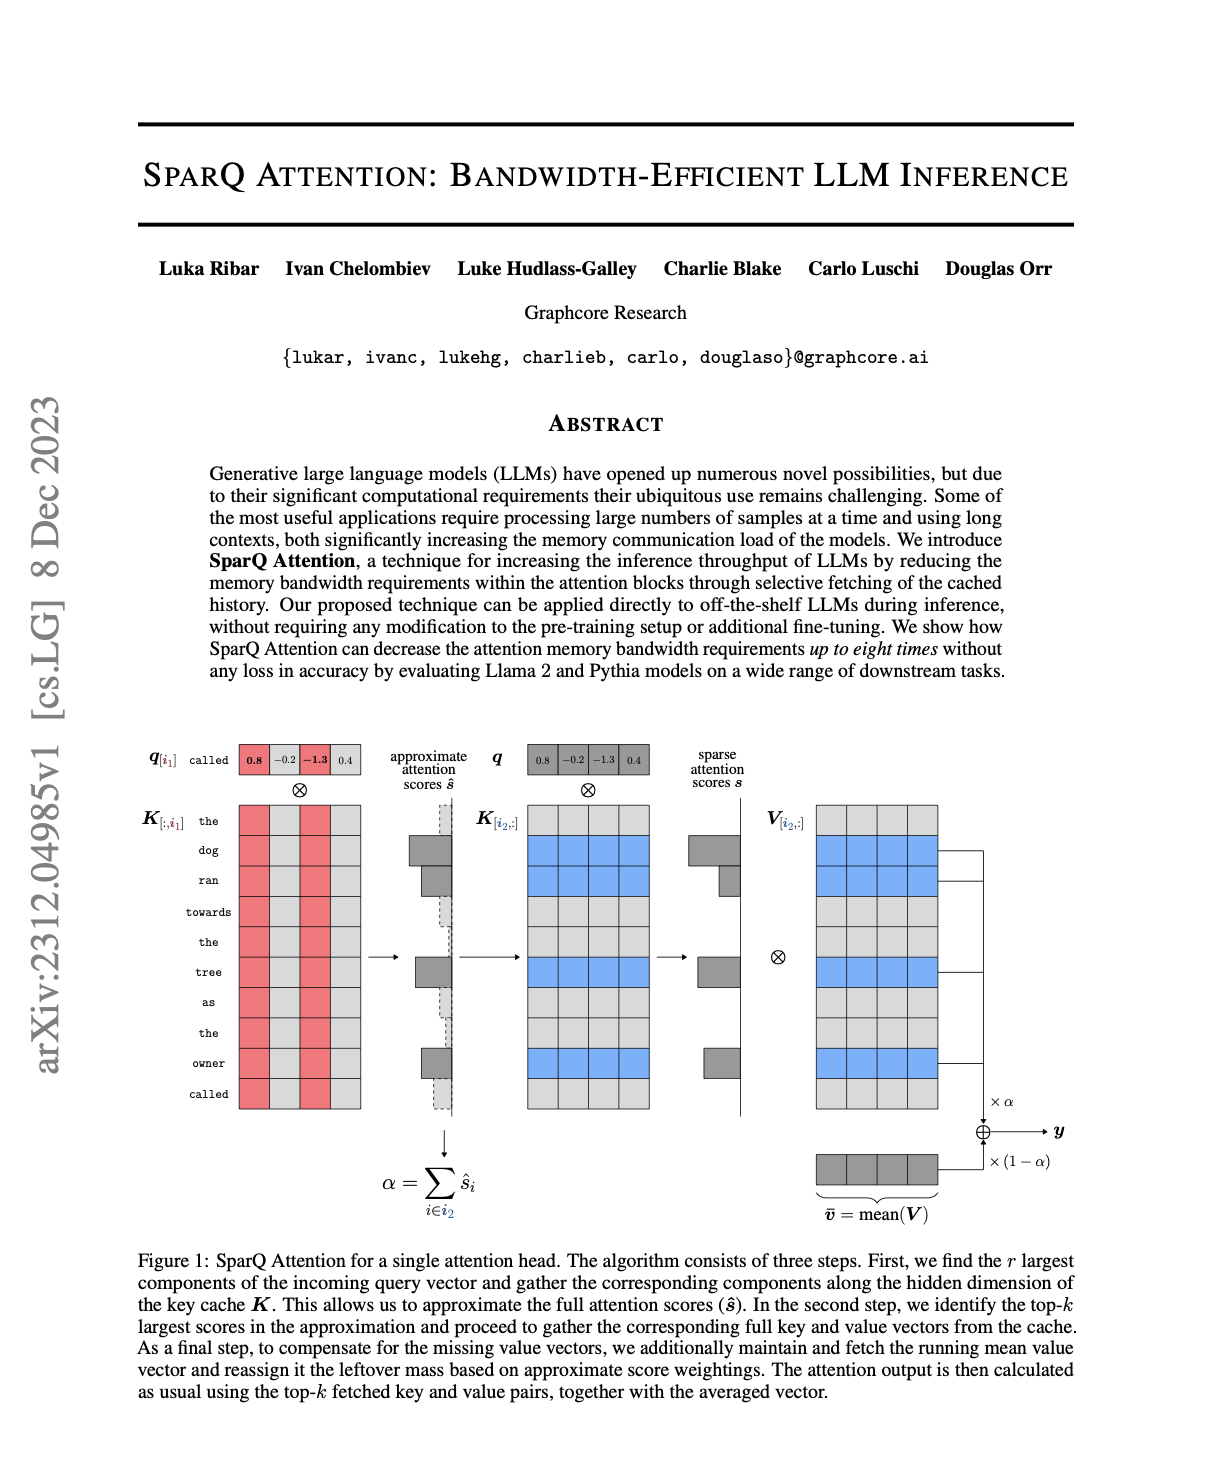 SPARQ ATTENTION: BANDWIDTH-EFFICIENT LLM INFERENCE